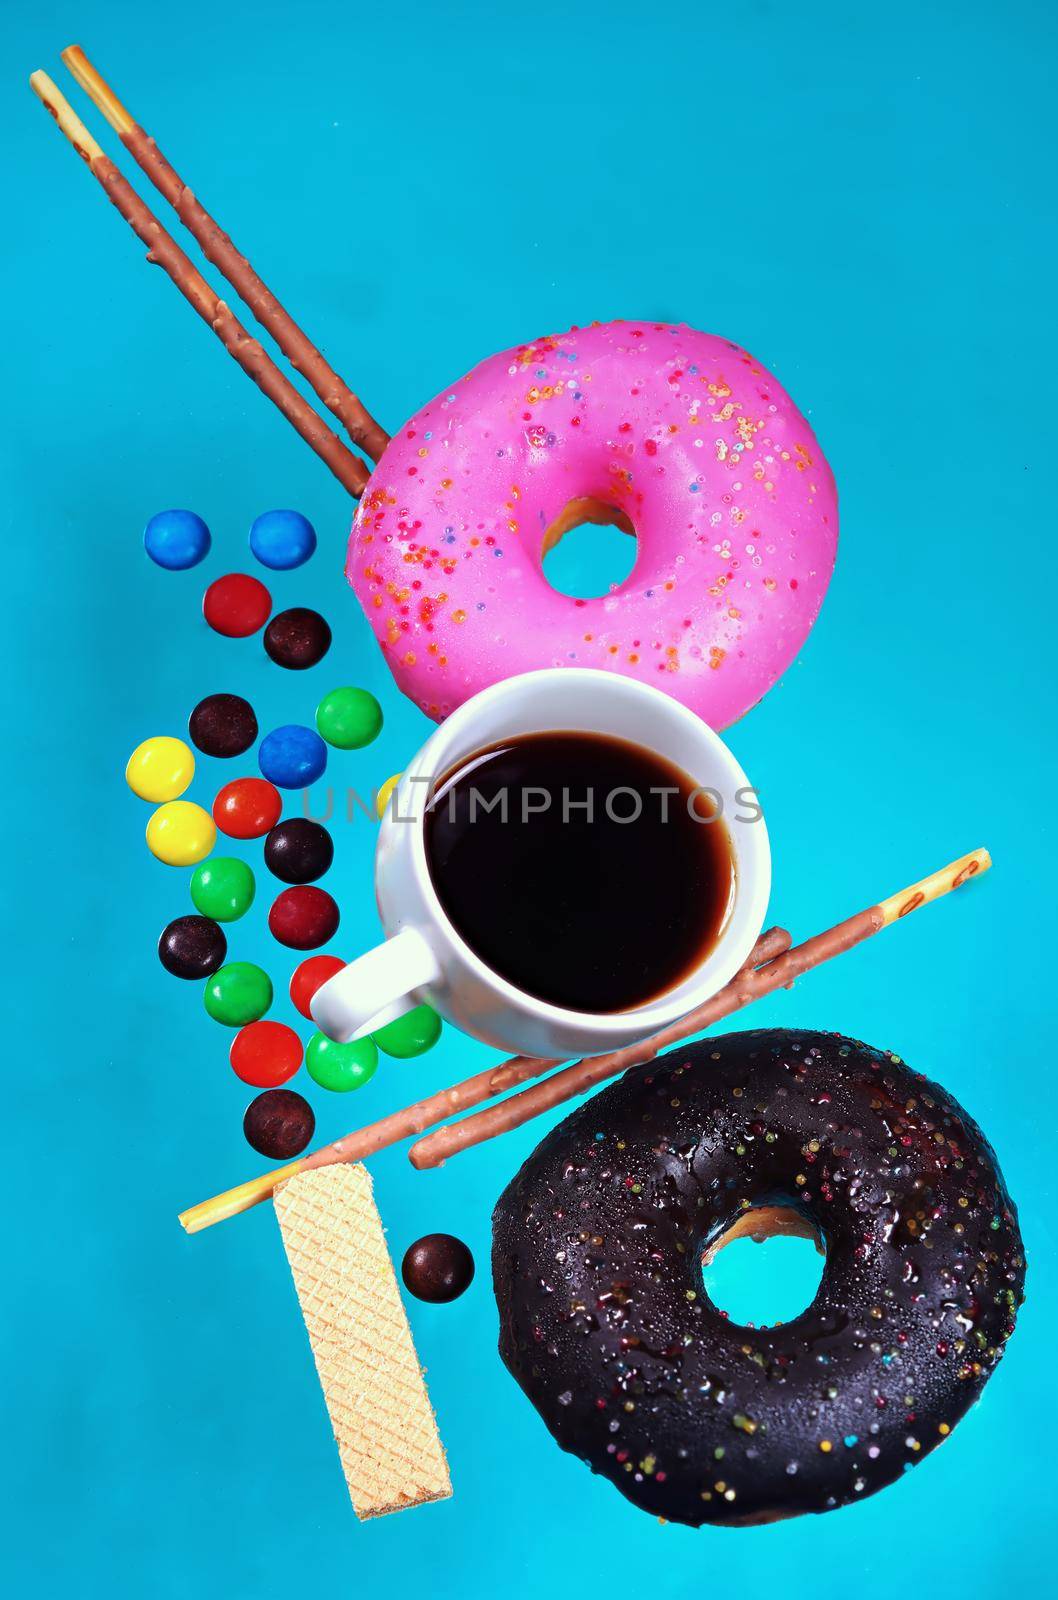 Vertical images of donuts and pastries colorful, pastel blue background. Sweet and snack ideas. by noppha80